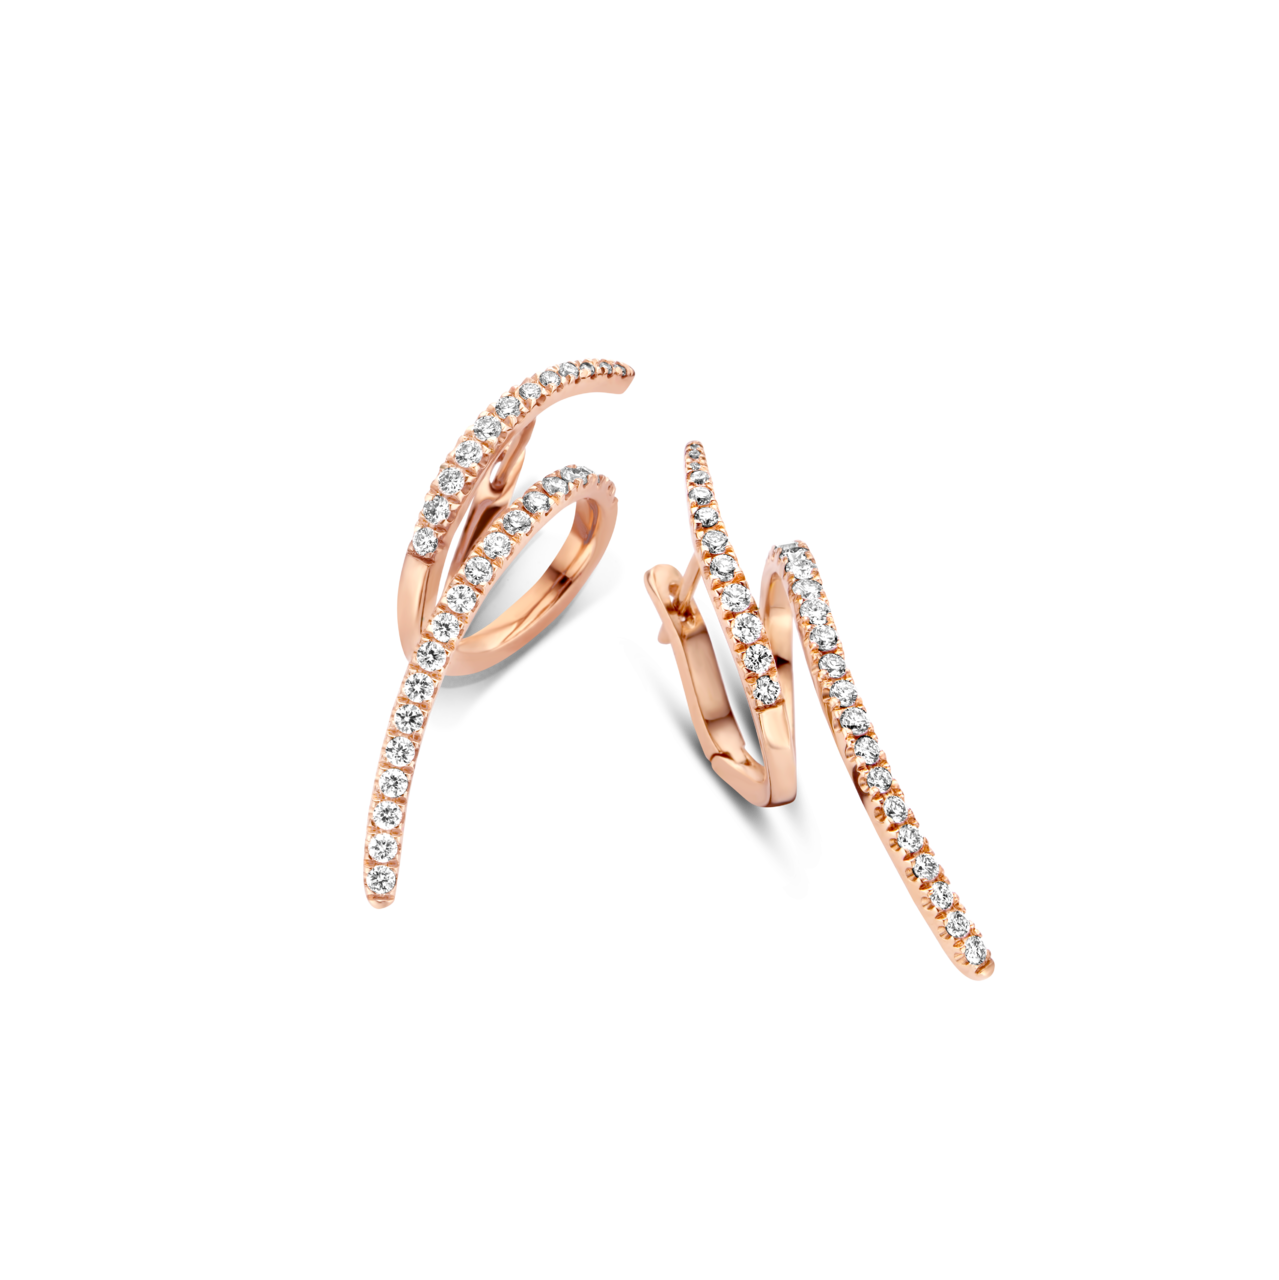 The Dalliance Lucia Earrings - a unique piece featuring 62 diamonds in a twist design with 6.25 grams of 18k recycled gold. Sold as a pair. Shown here in 18K Rose Gold.